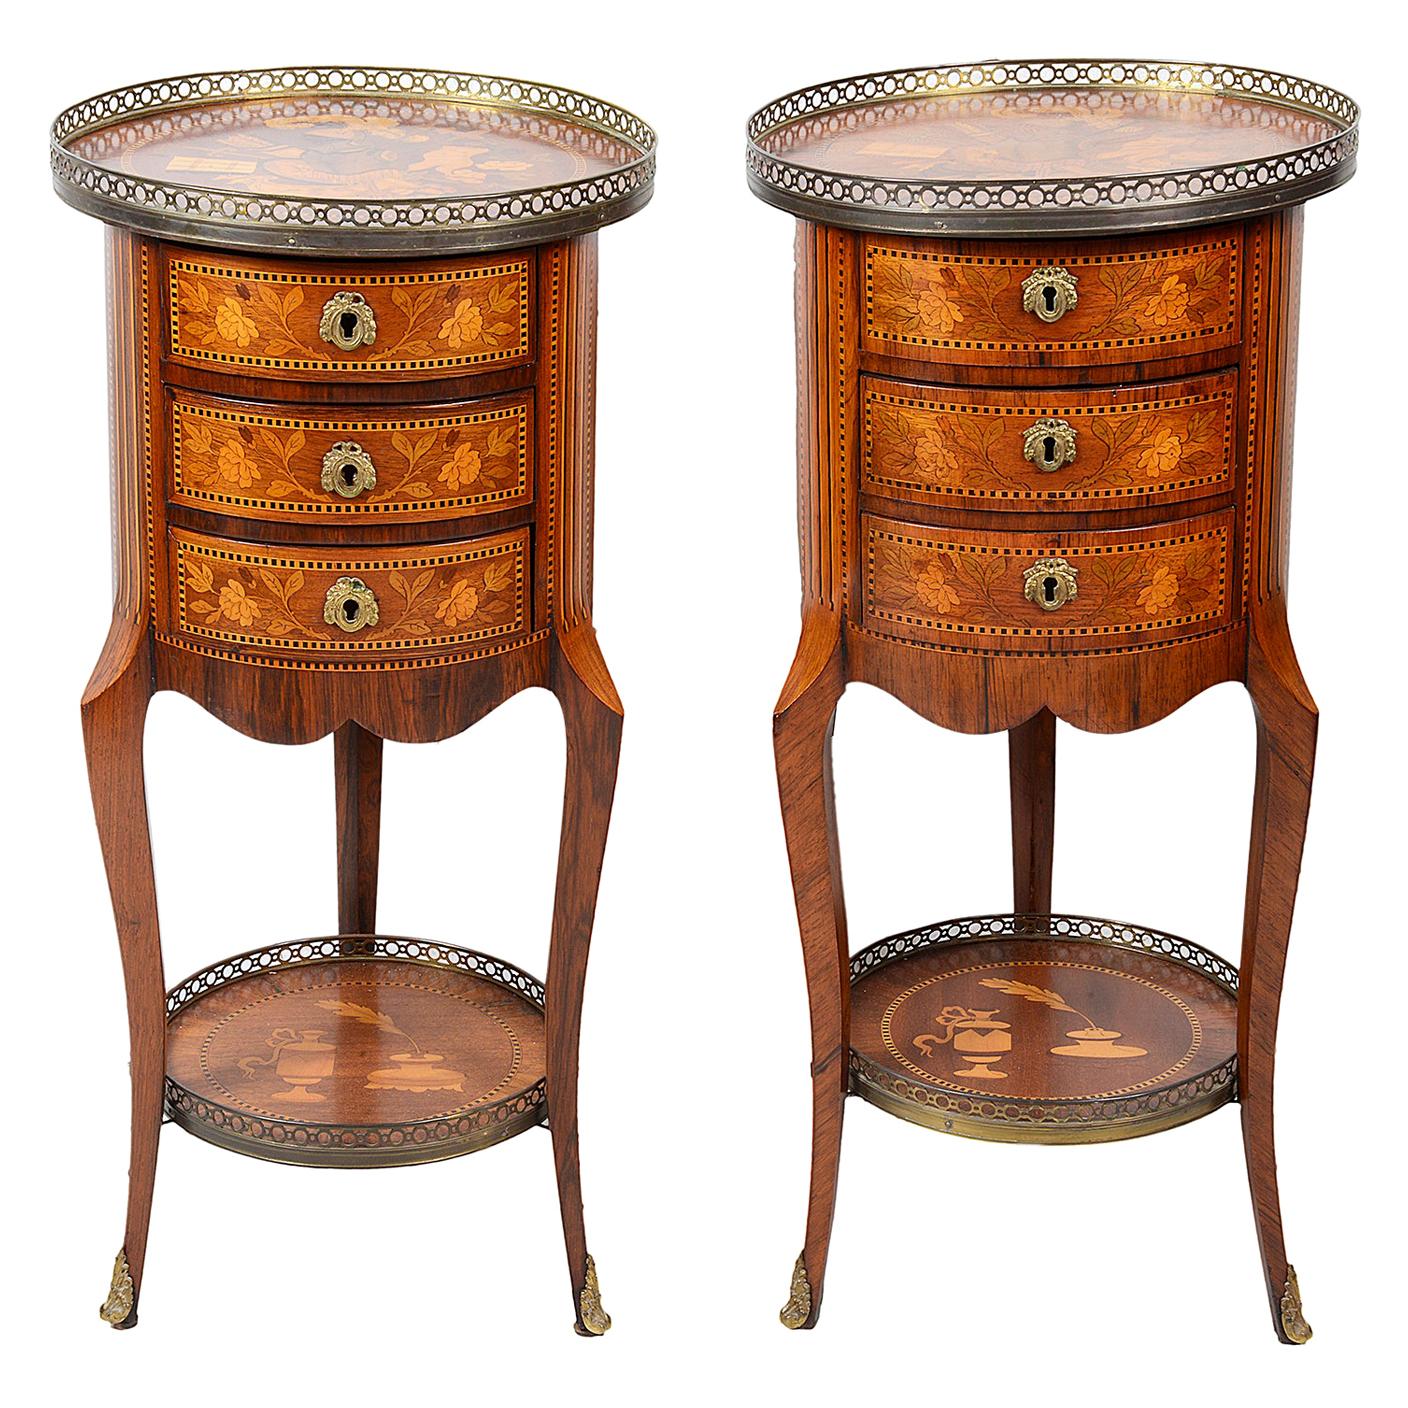 Pair French 19th Century Marquetry Side Tables